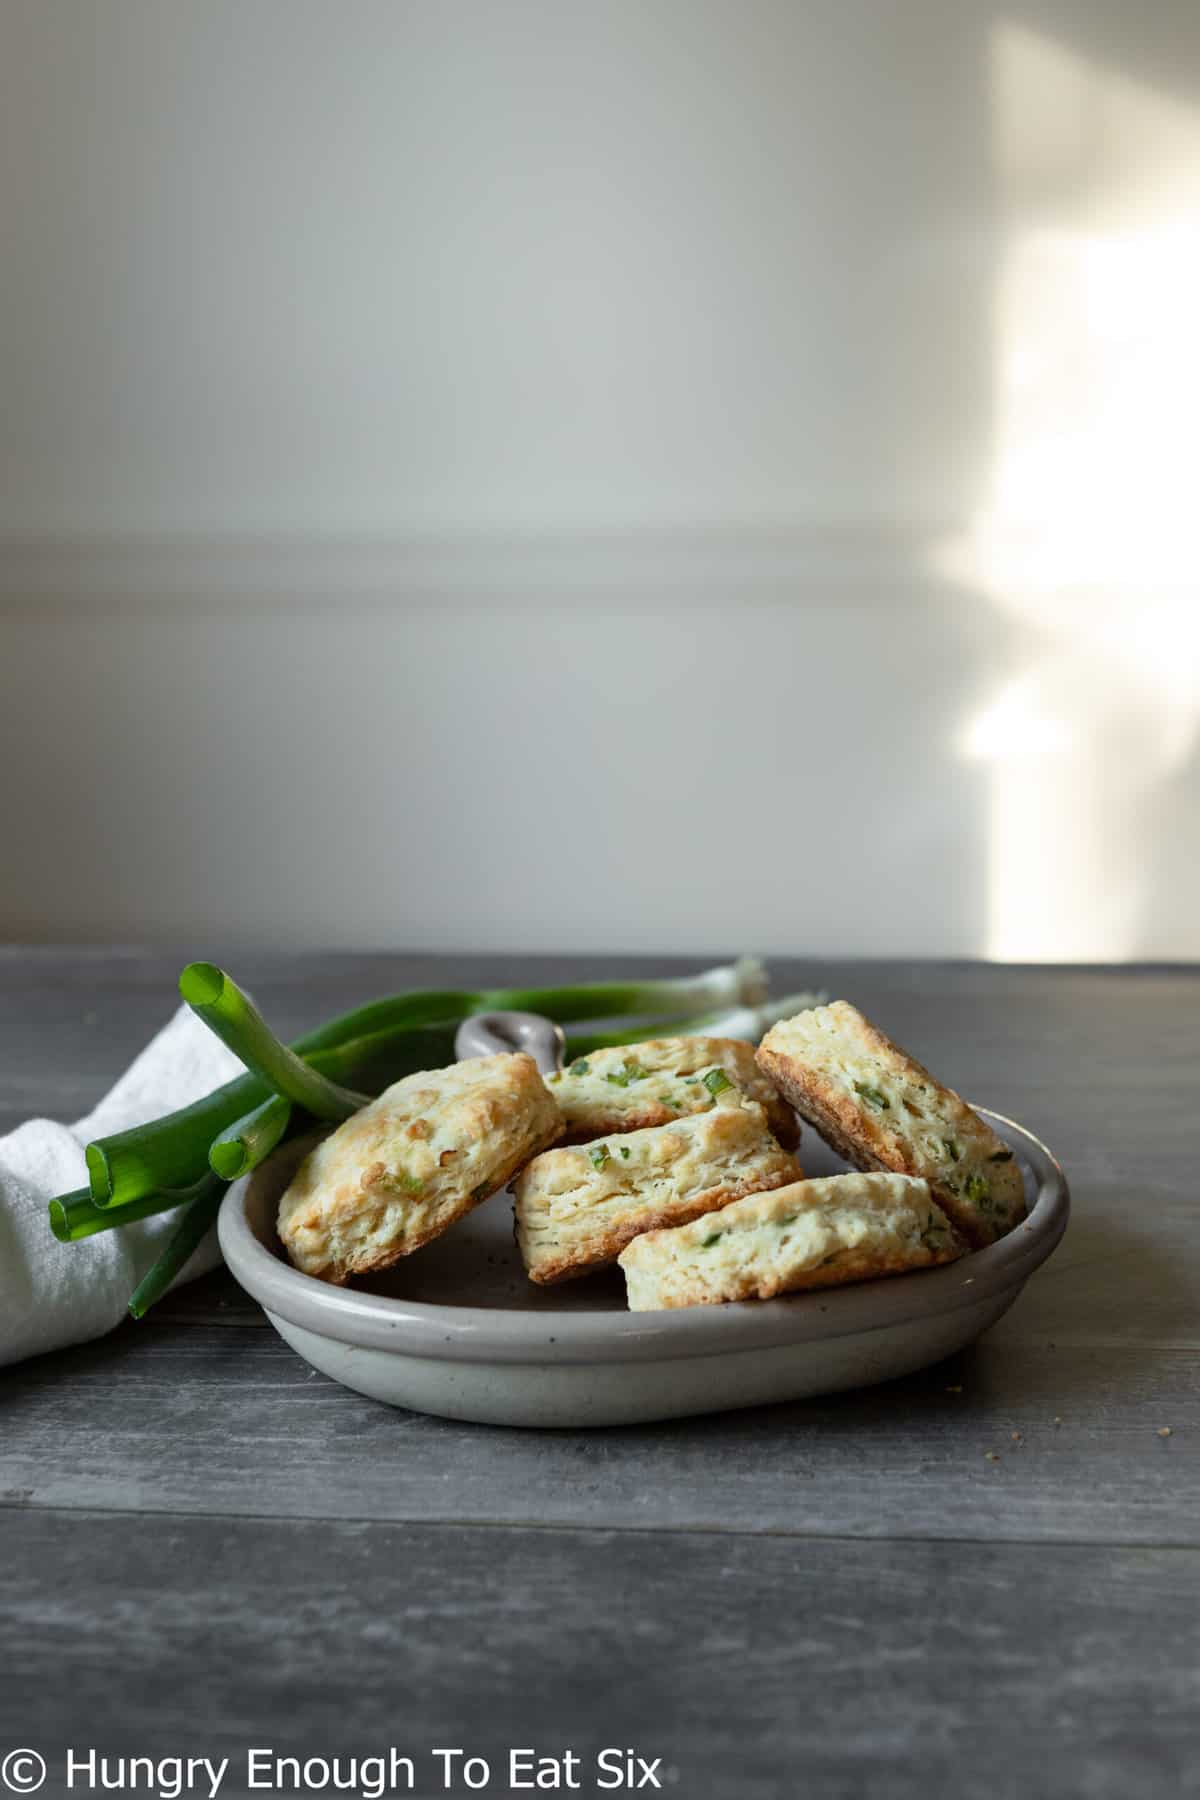 Gray plate with baked biscuits and fresh scallions.